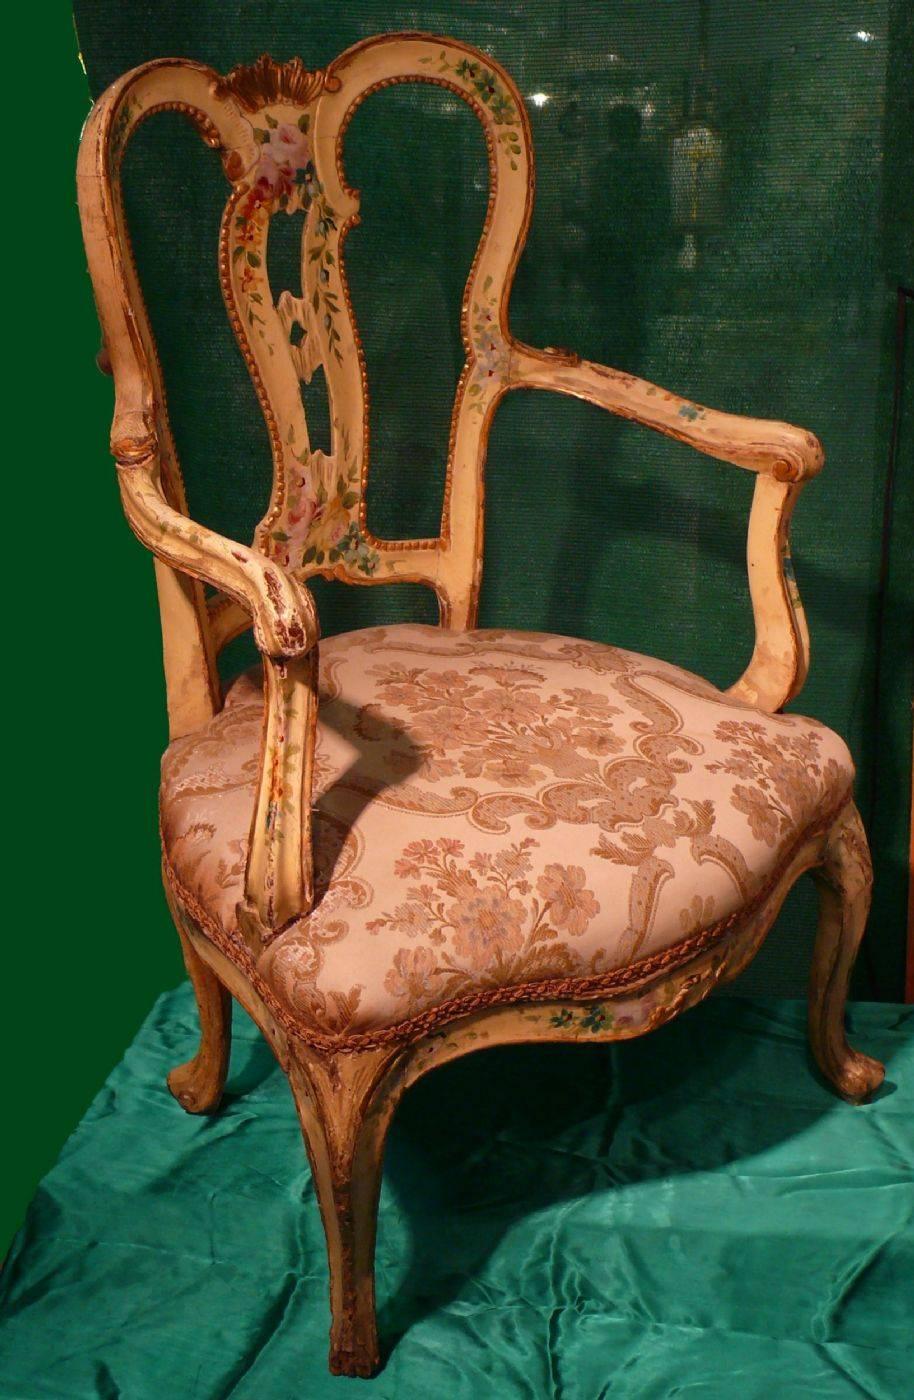 Authentic pair of lacquered armchairs, decorated in a bunch, from the first half of the eighteenth century, Venice. Exceptional furniture. Status: never restored. They are part of a whole including also: a bench, two chairs, a sofa, a console.